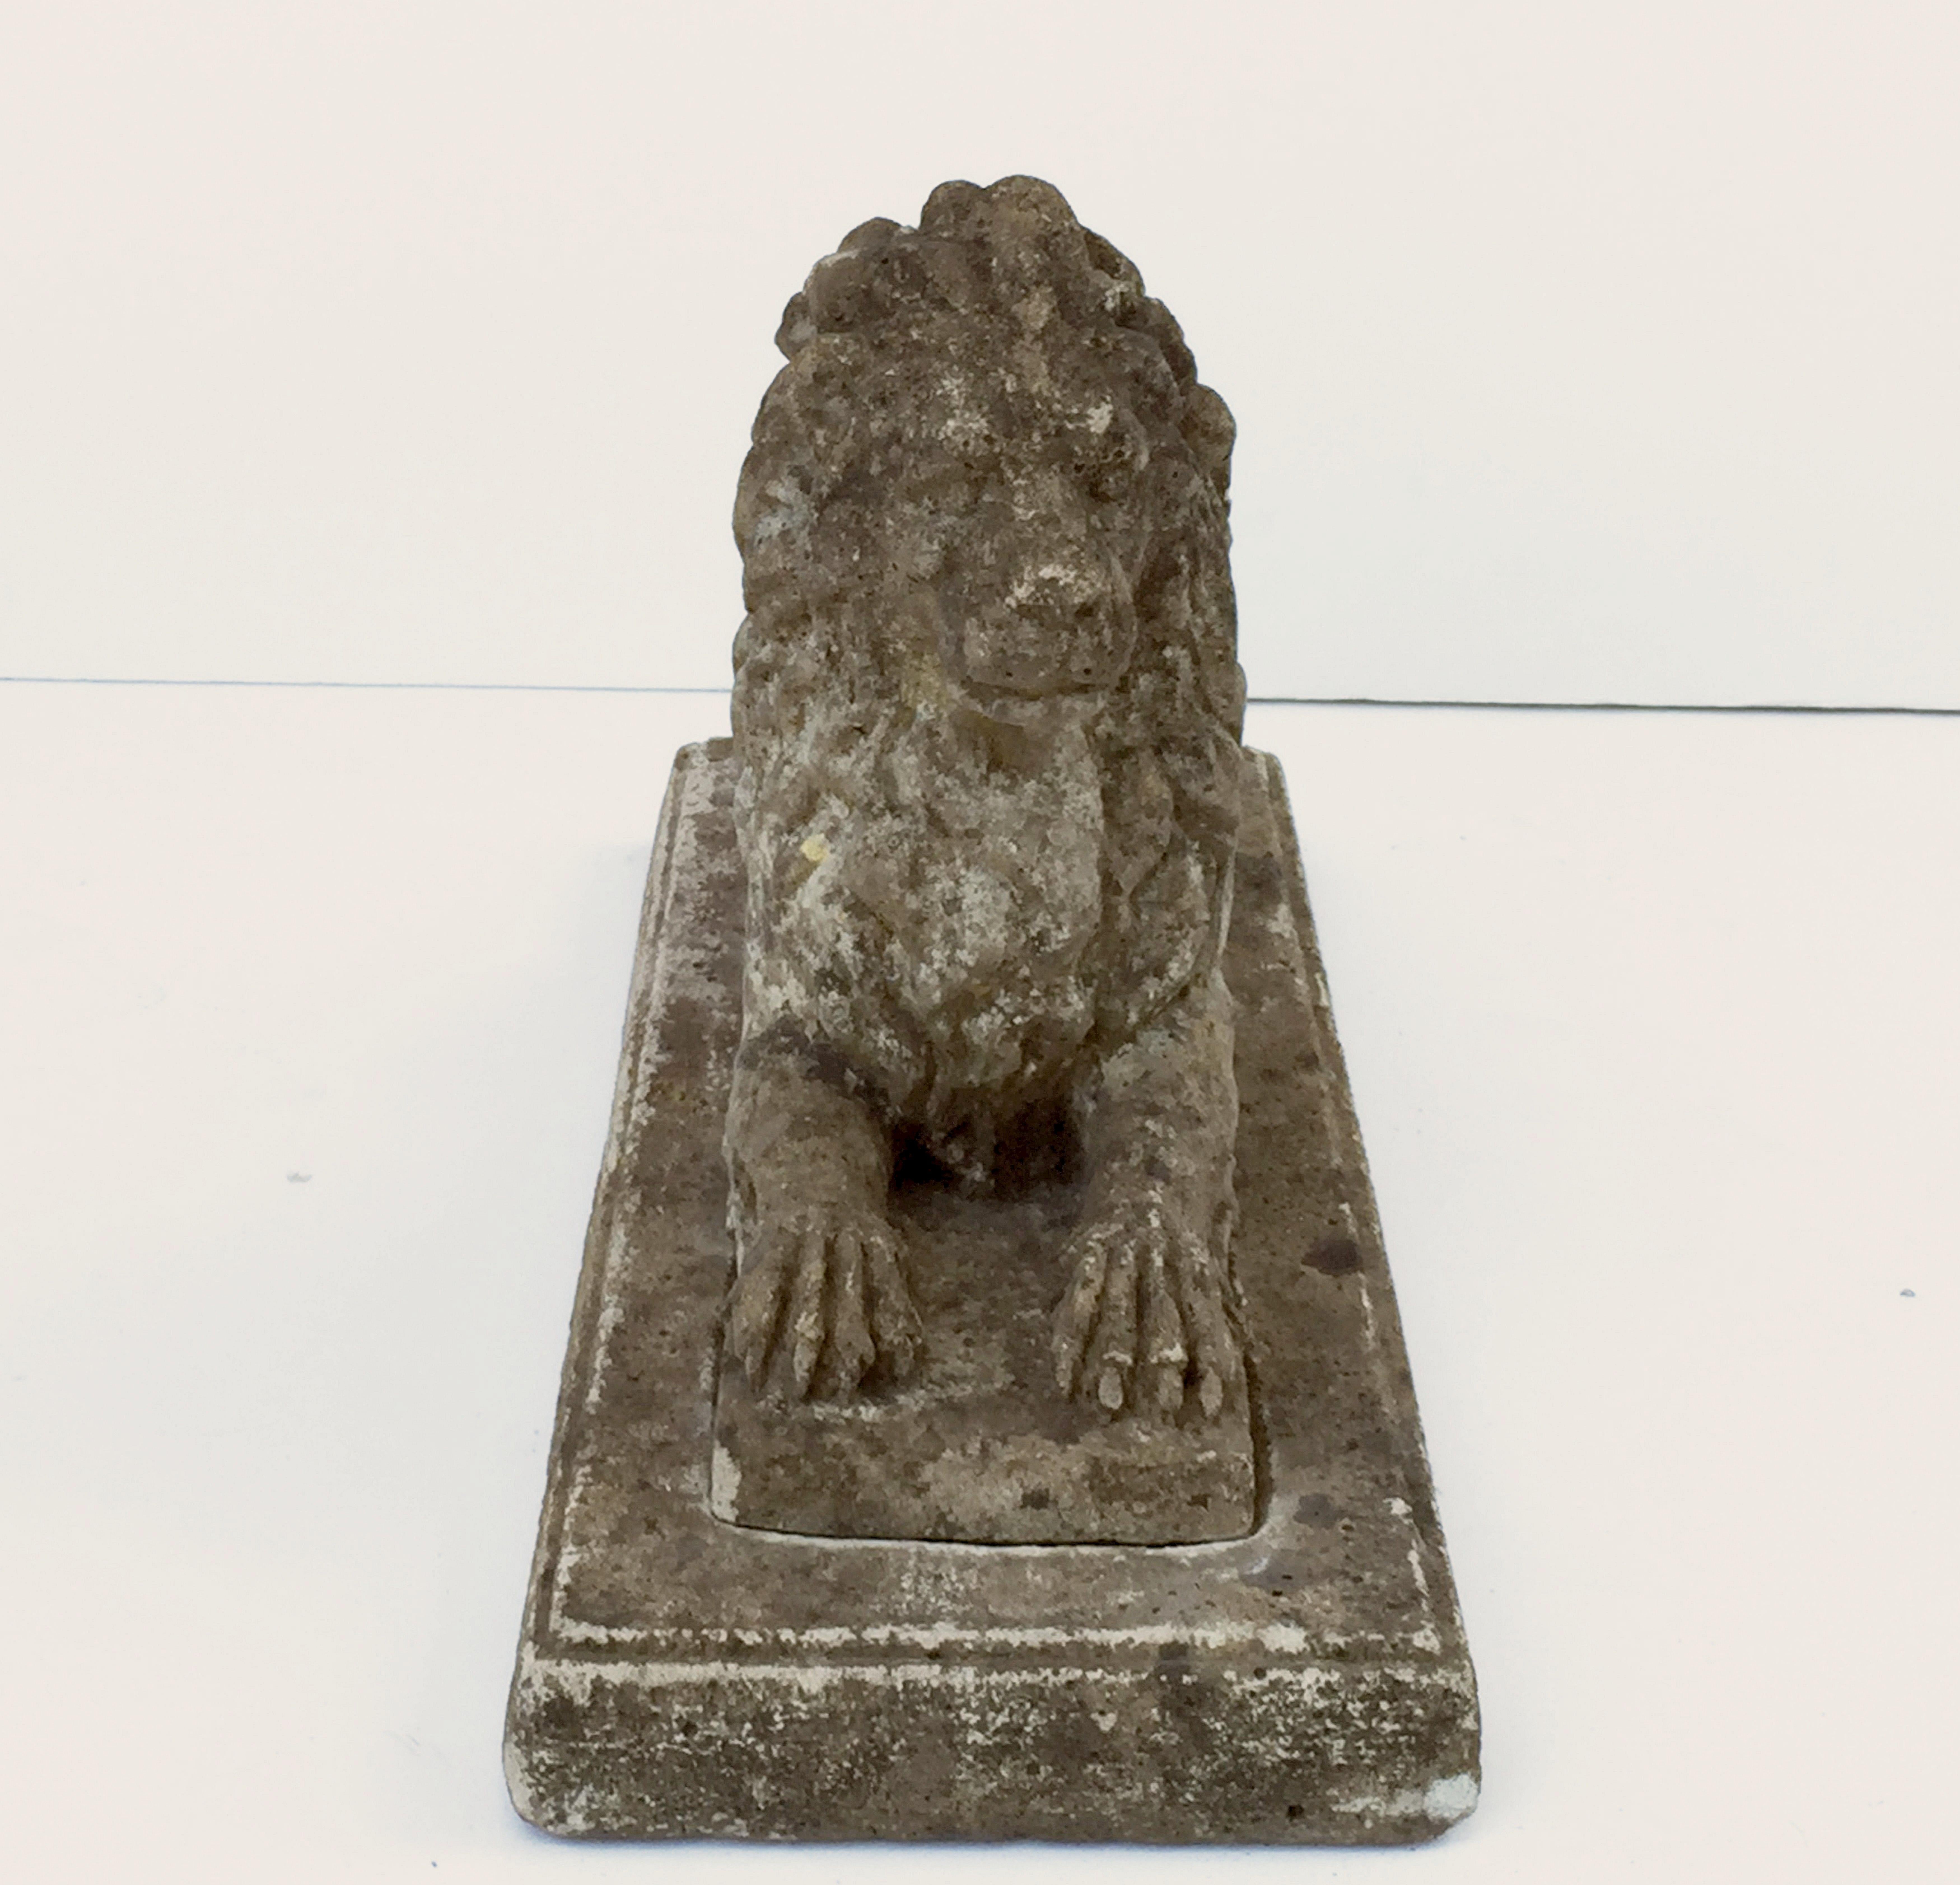 English Garden Stone Lions on Plinths 'Priced as a Pair' 5